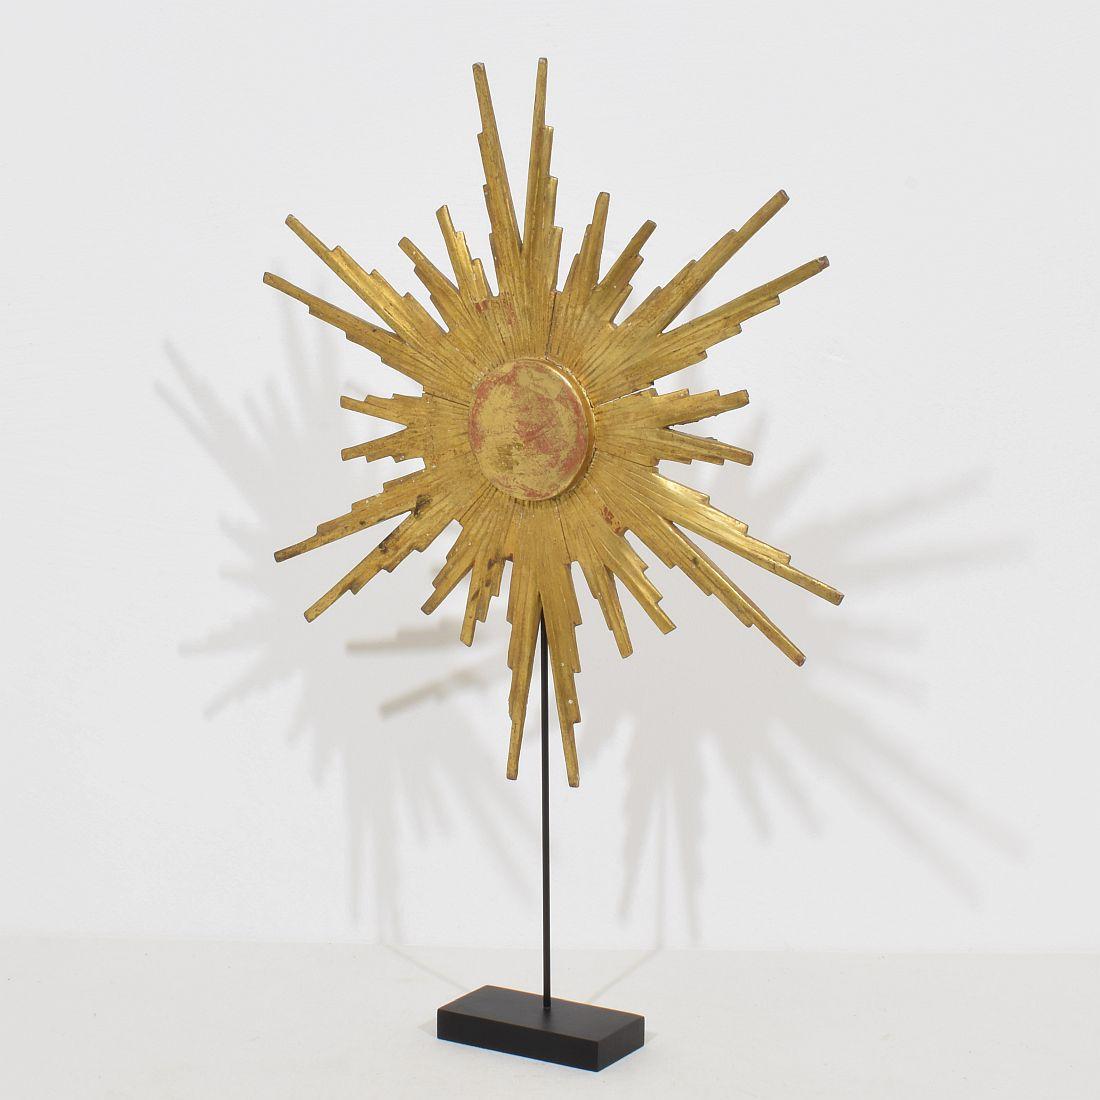 Beautiful weathered one of a kind piece. Giltwood baroque style sun, Italy, circa 1800-1900.
Weathered.
Measurement includes the wooden base.